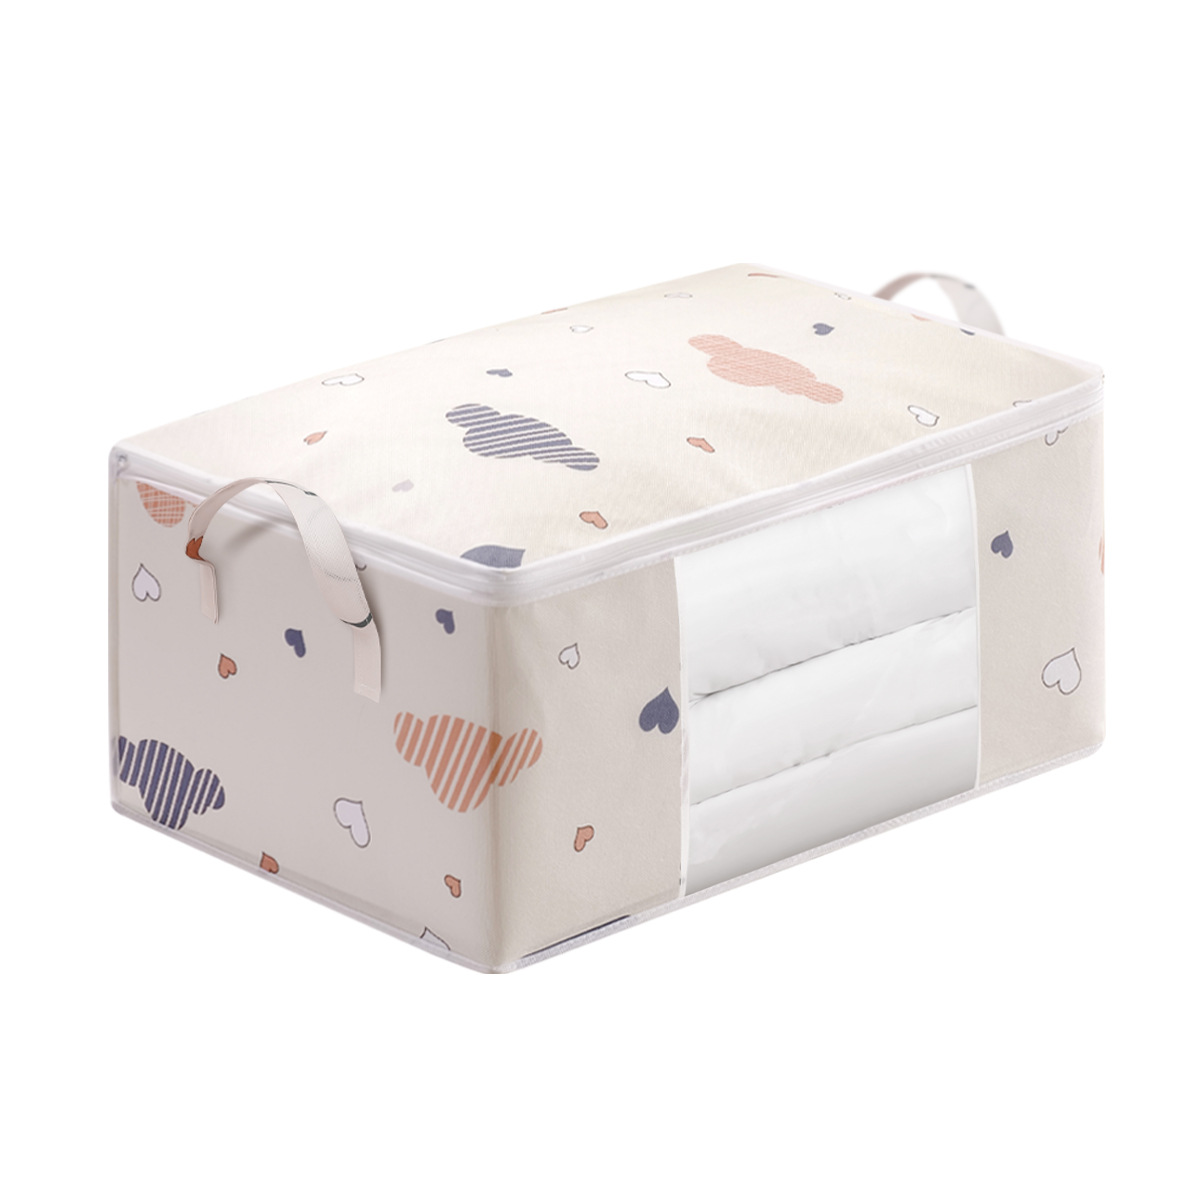 Quilt Storage Bag with Handle Quilt Bag Multi-Functional Dust Bag Household Moving Packing Bag Organizing Bag Storage Box